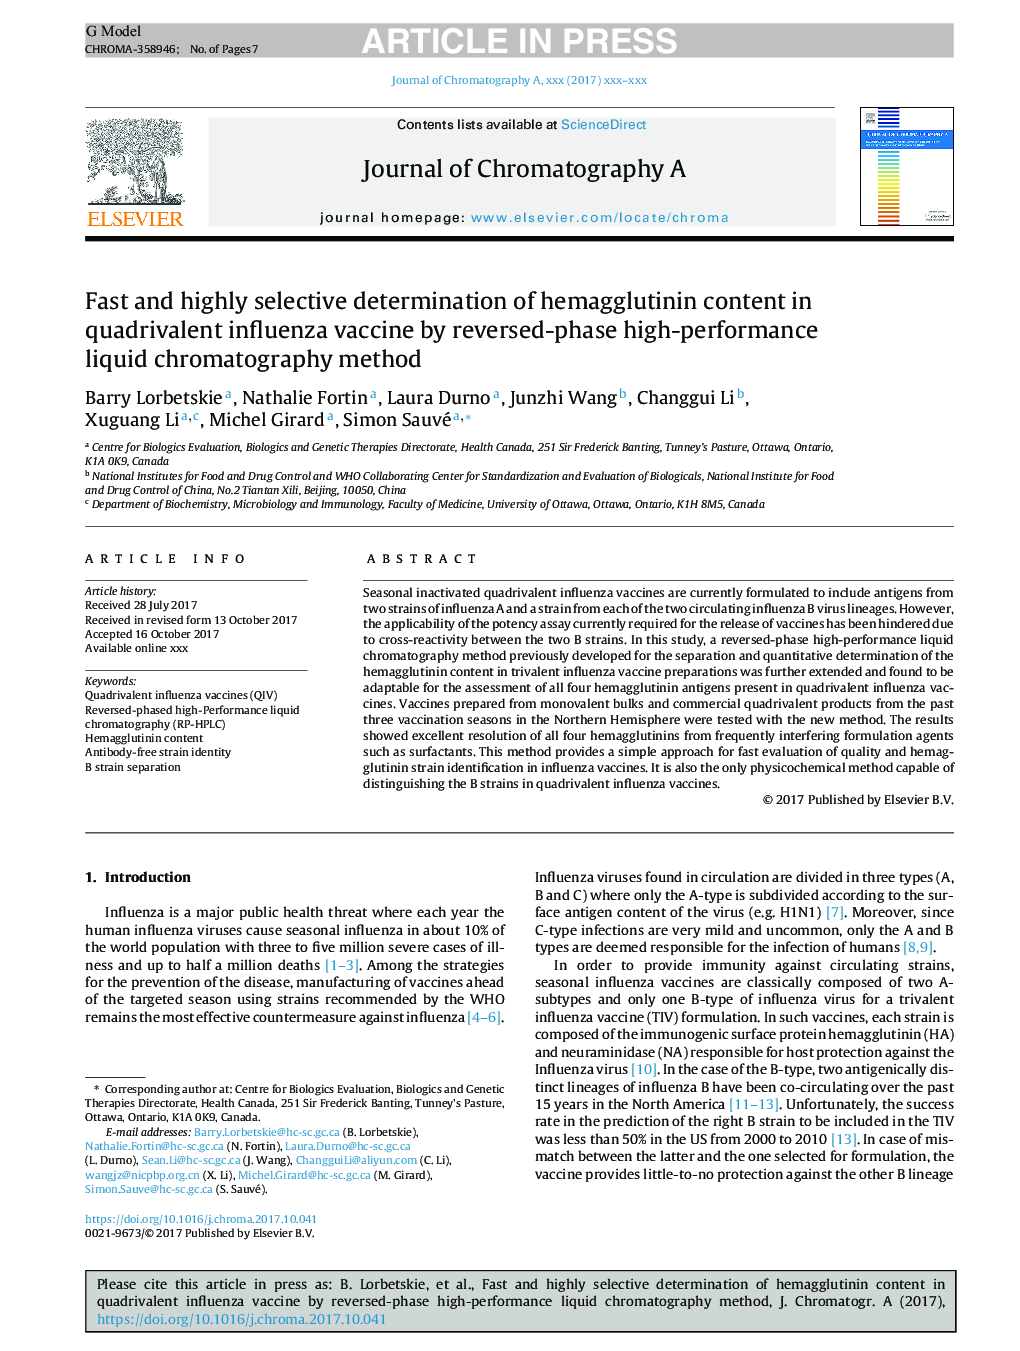 Fast and highly selective determination of hemagglutinin content in quadrivalent influenza vaccine by reversed-phase high-performance liquid chromatography method